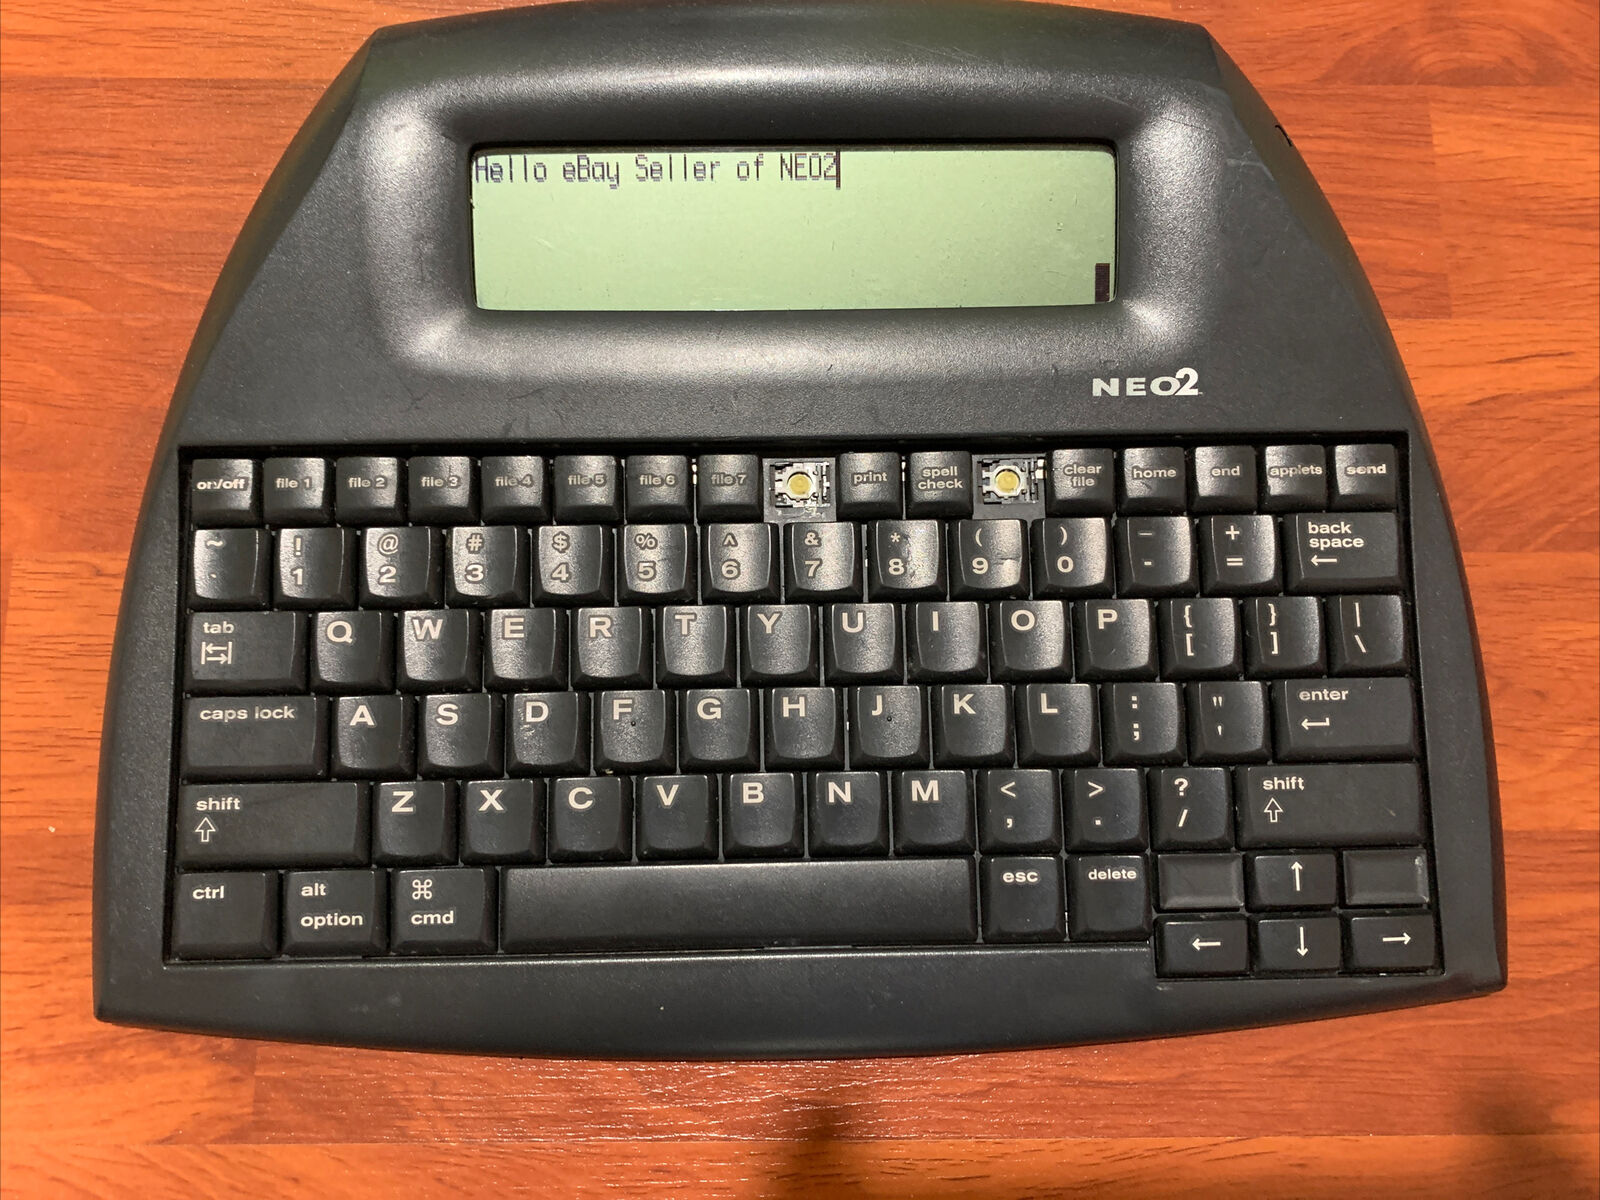 AlphaSmart Neo2 Word Processor - Missing 2 Key Pads - See Photos